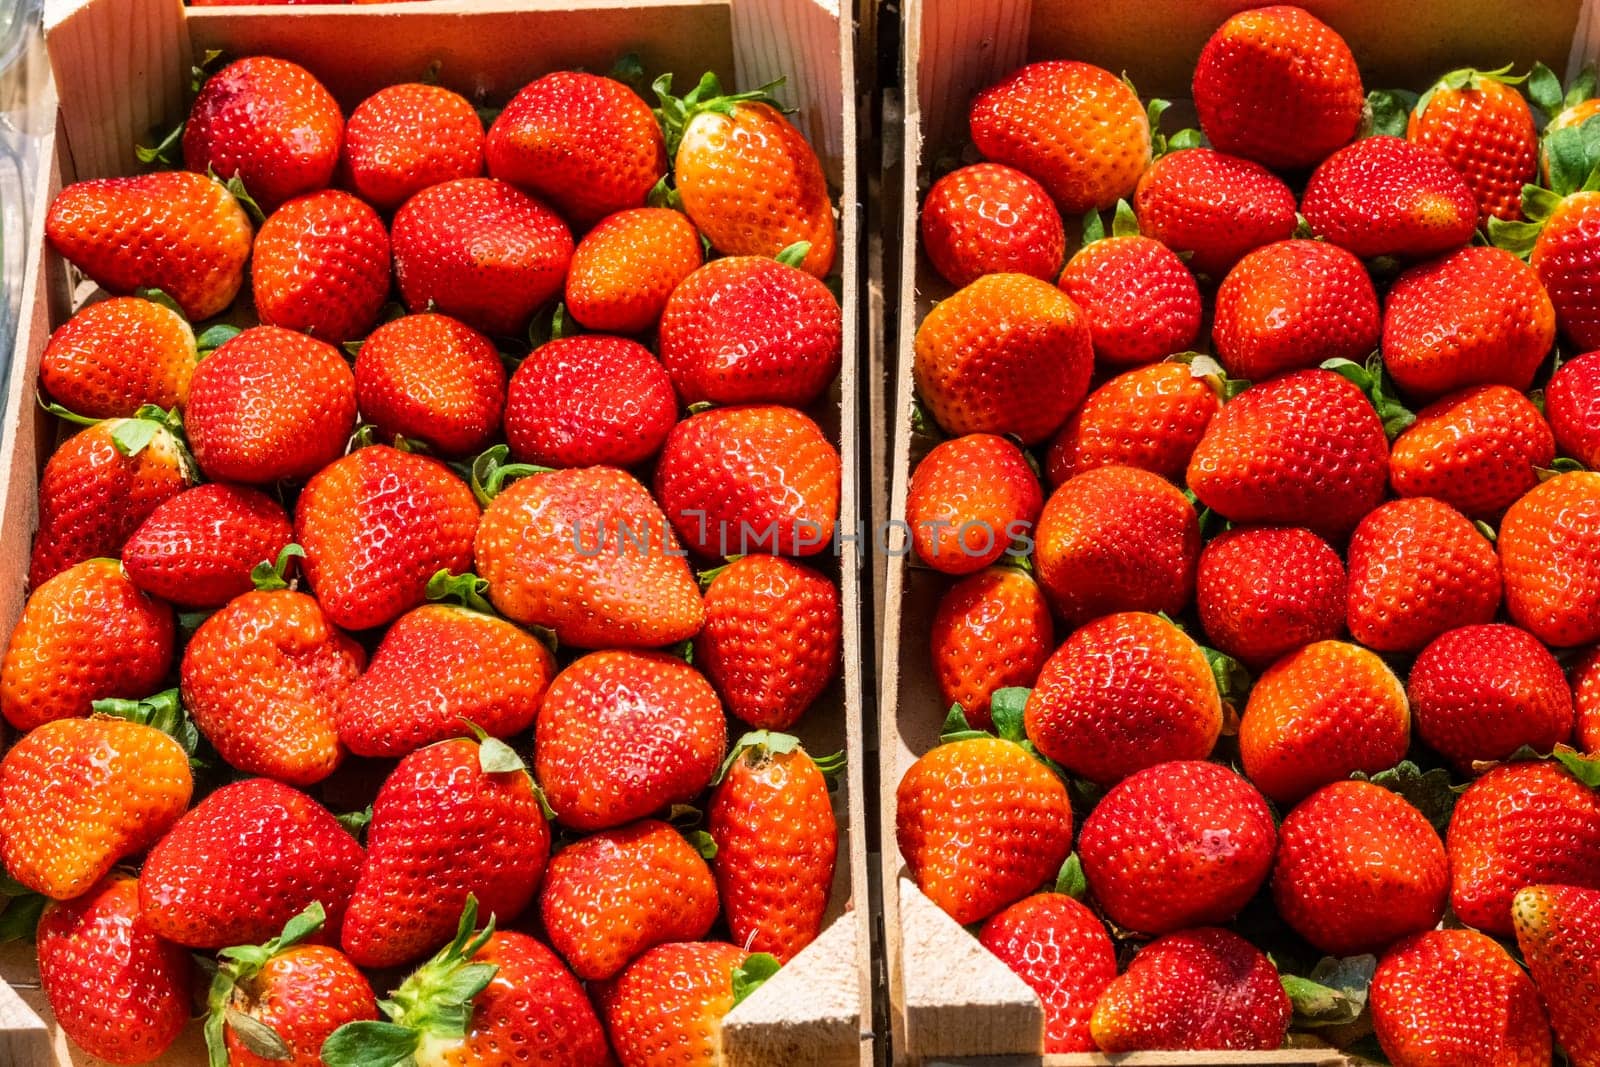 Fresh ripe strawberries for sale at a market